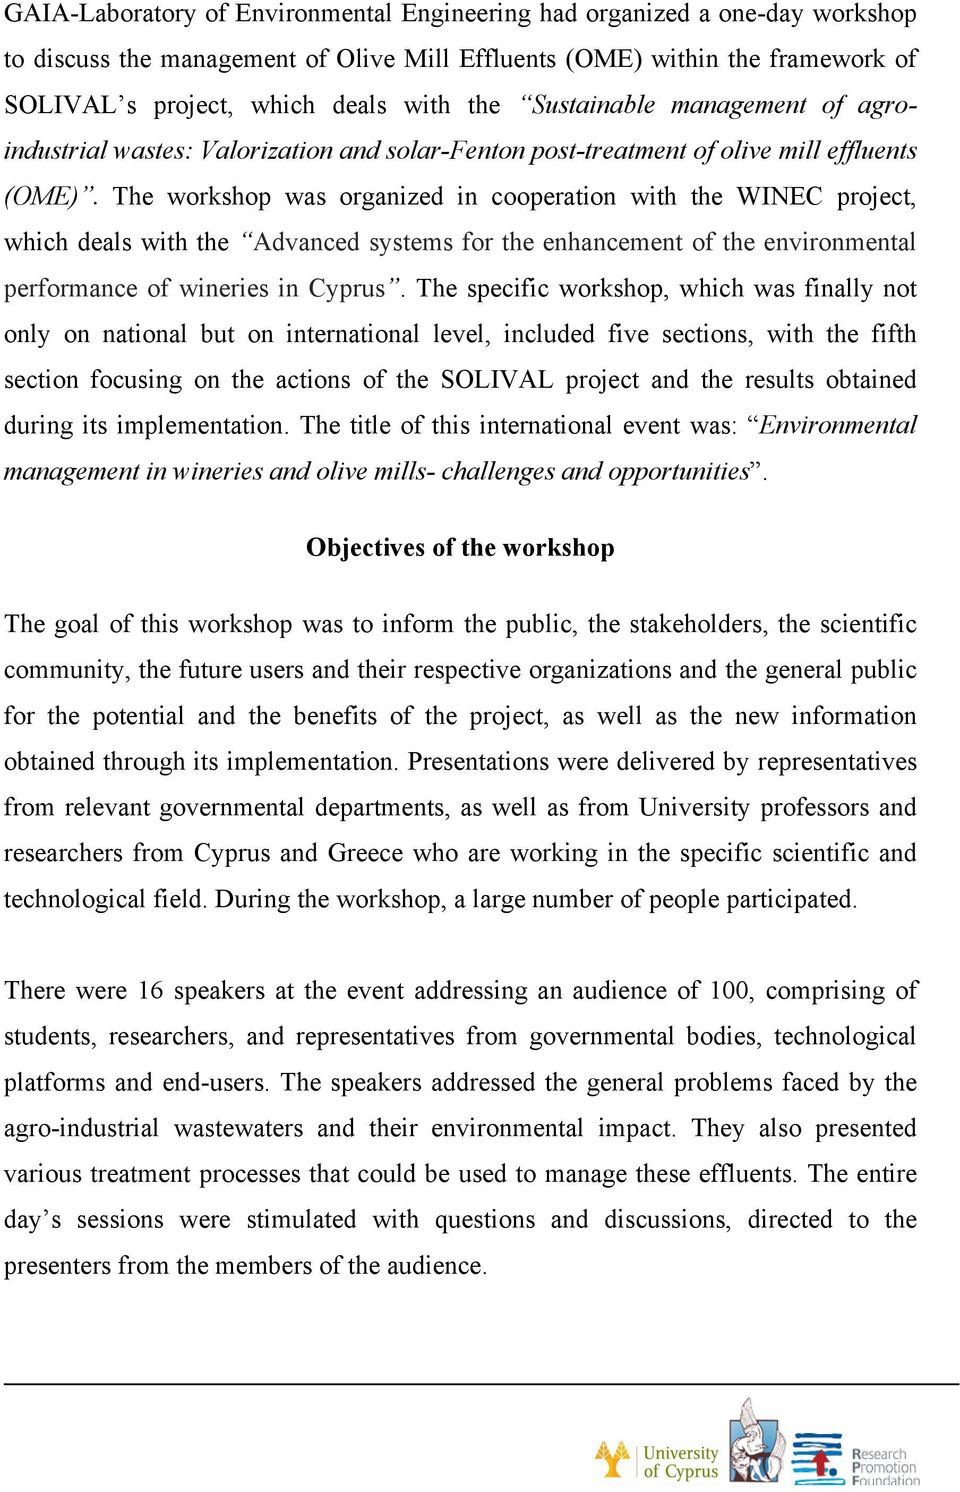 The workshop was organized in cooperation with the WINEC project, which deals with the Advanced systems for the enhancement of the environmental performance of wineries in Cyprus.